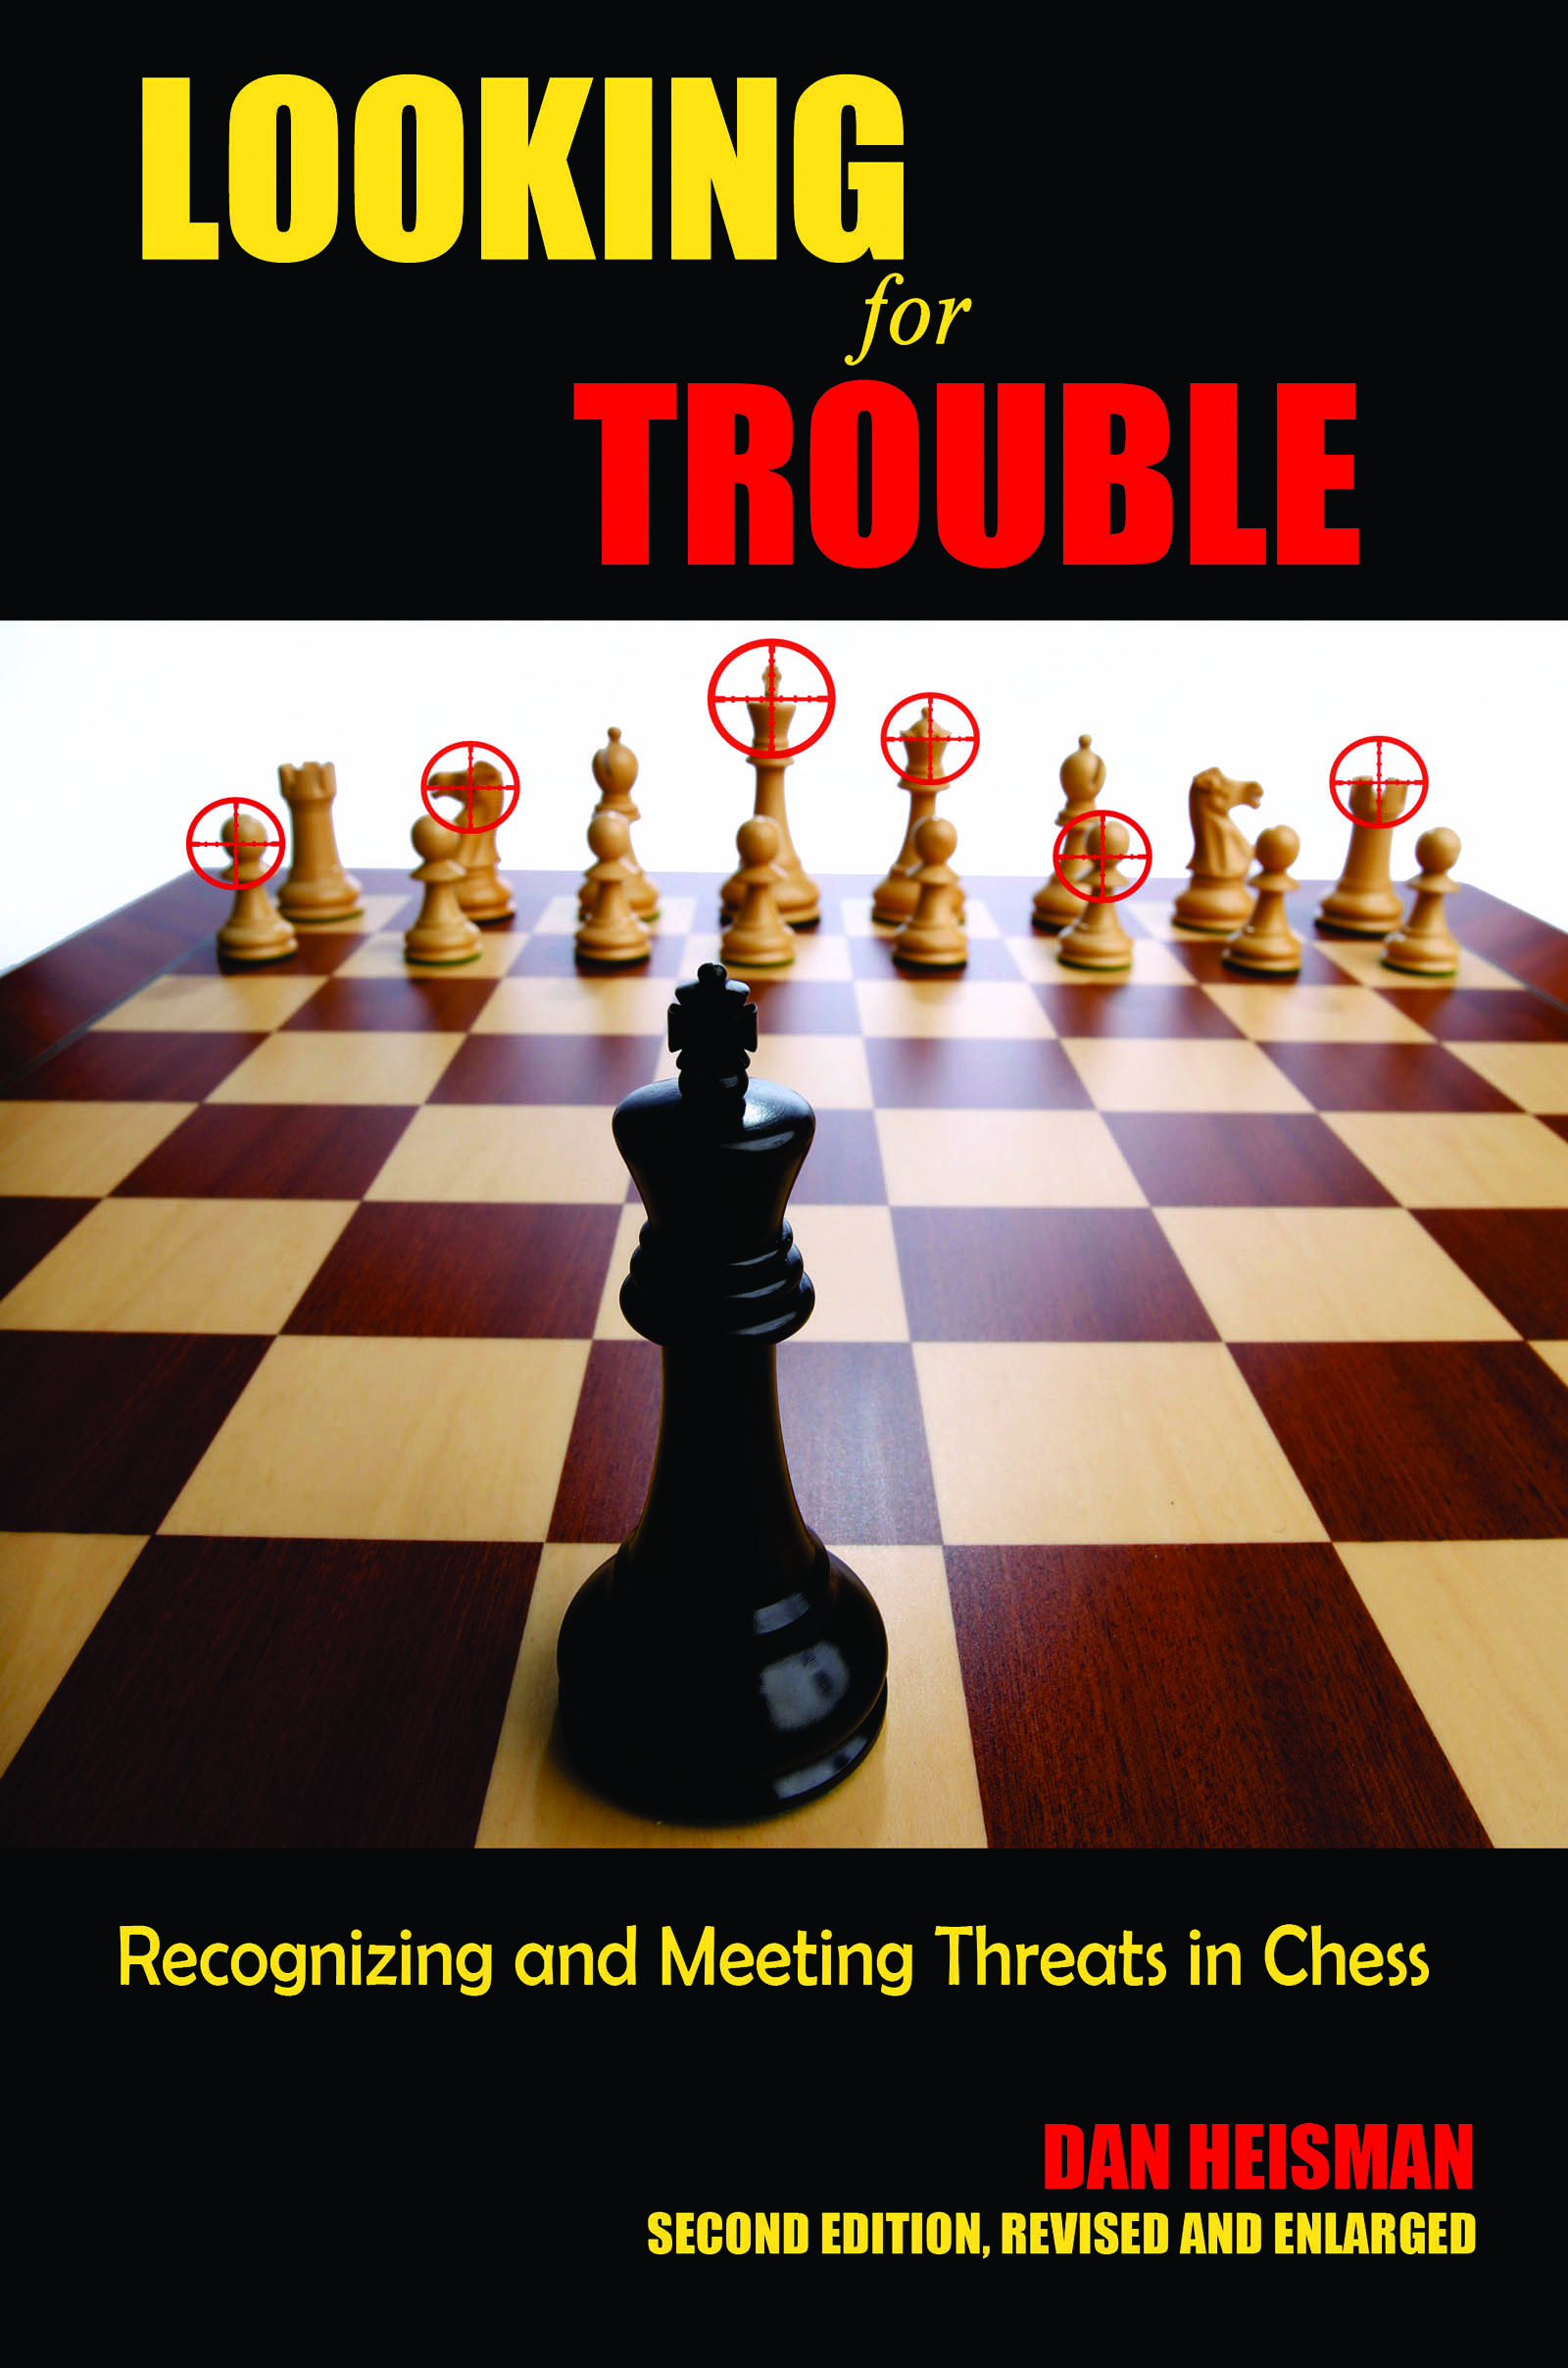 Looking For Trouble: Recognizing and Meeting Threats in Chess